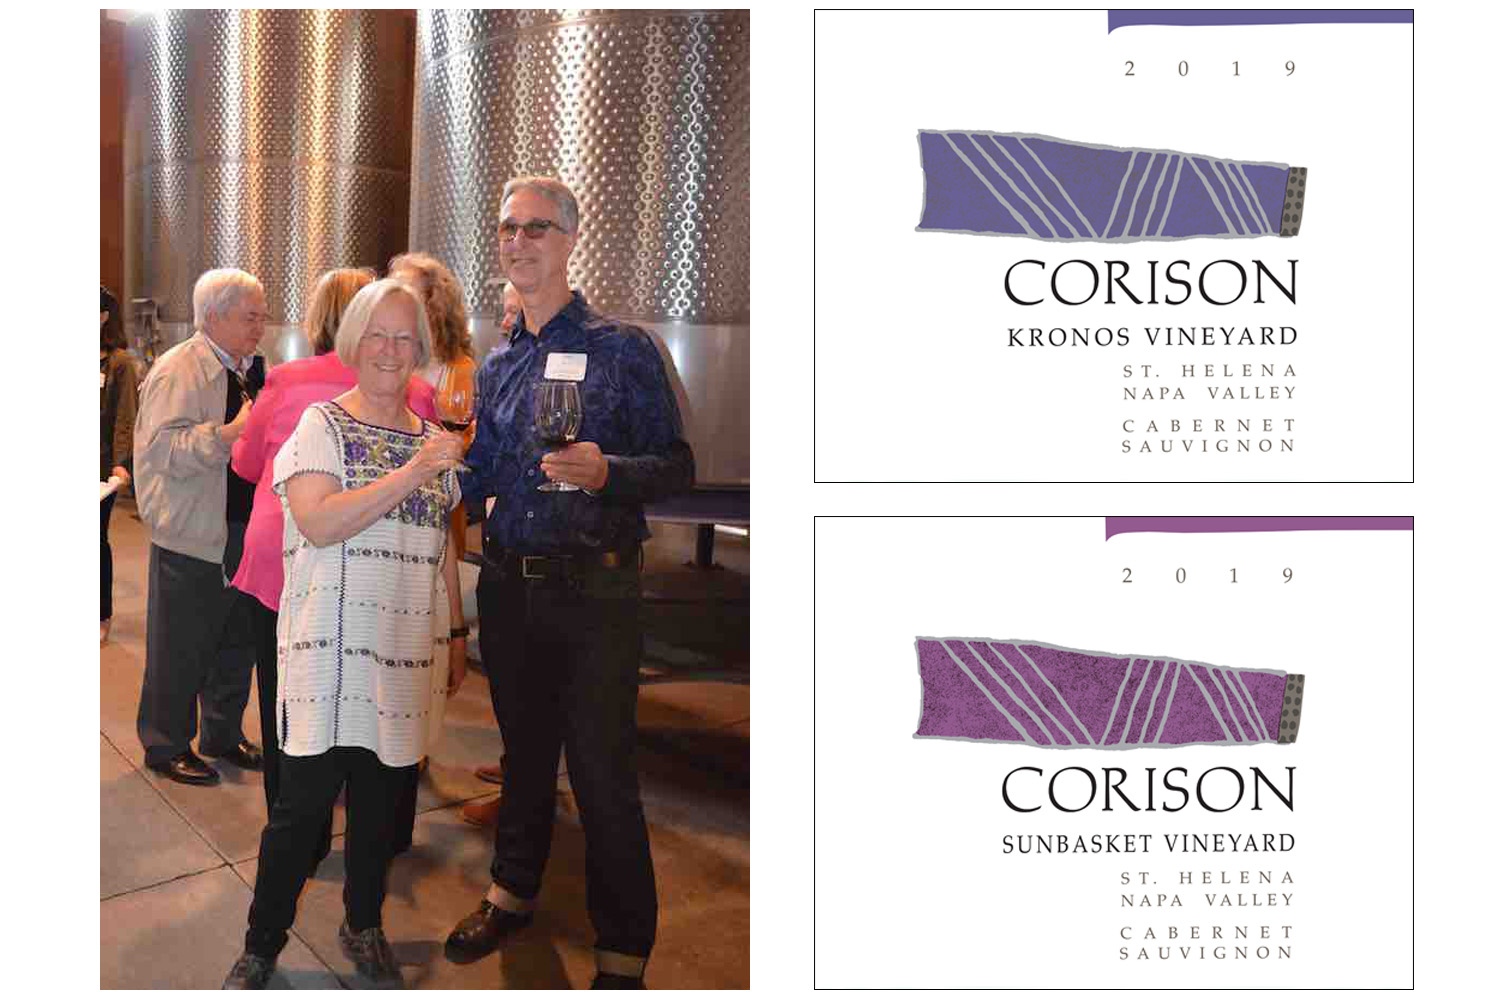 Photo of Cathy Corison and party guest in the tank room at Corison Winery, and labels of the 2019 Corison Kronos Vineyard Cabernet Sauvignon and the 2019 Corison Sunbasket Vineyard Cabernet Sauvignon.